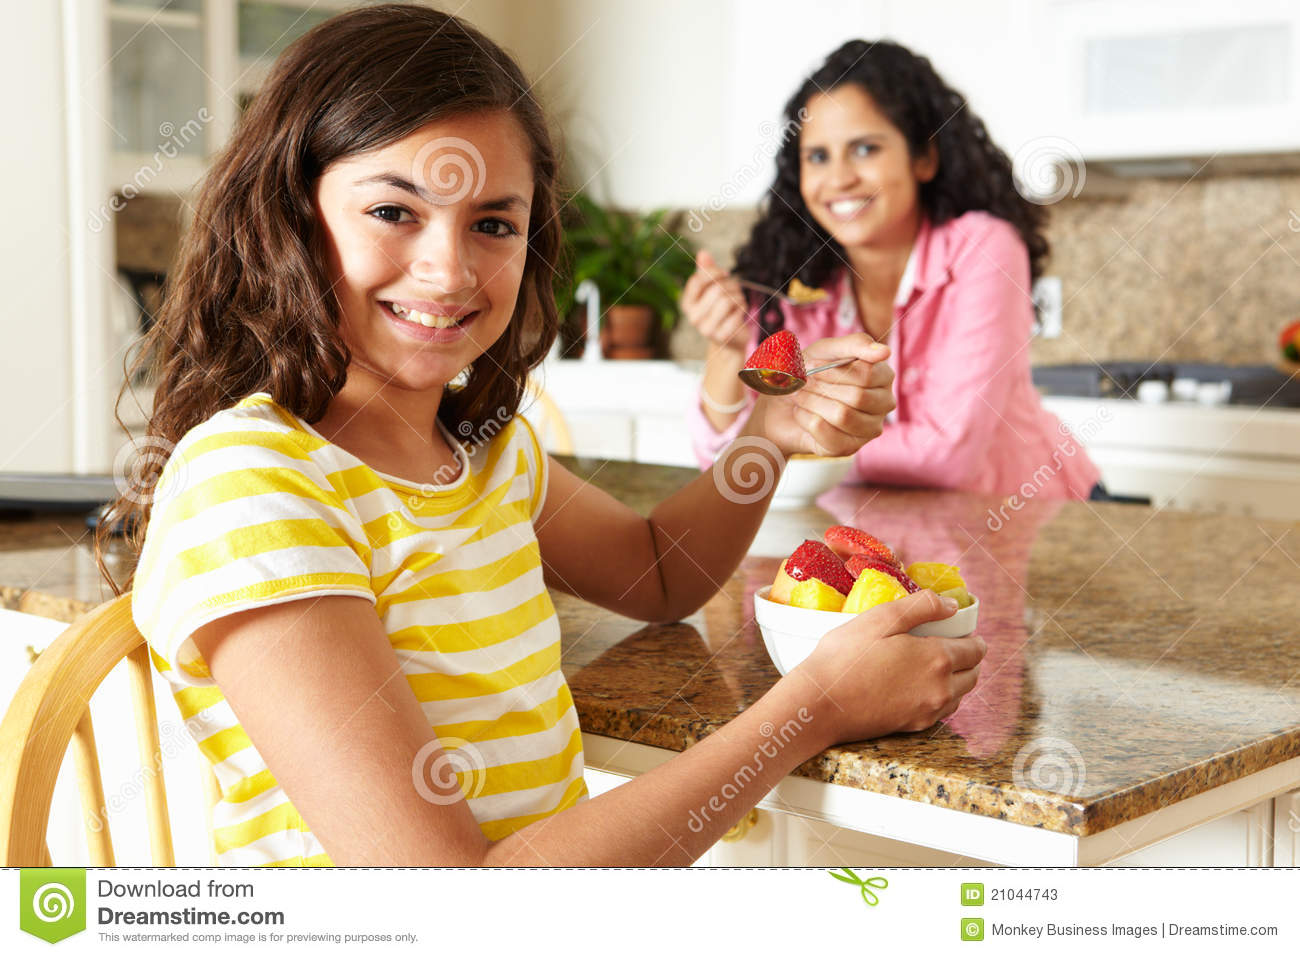 Mother And Daughter Eating Cereal And Fruit Together Smiling At Camera